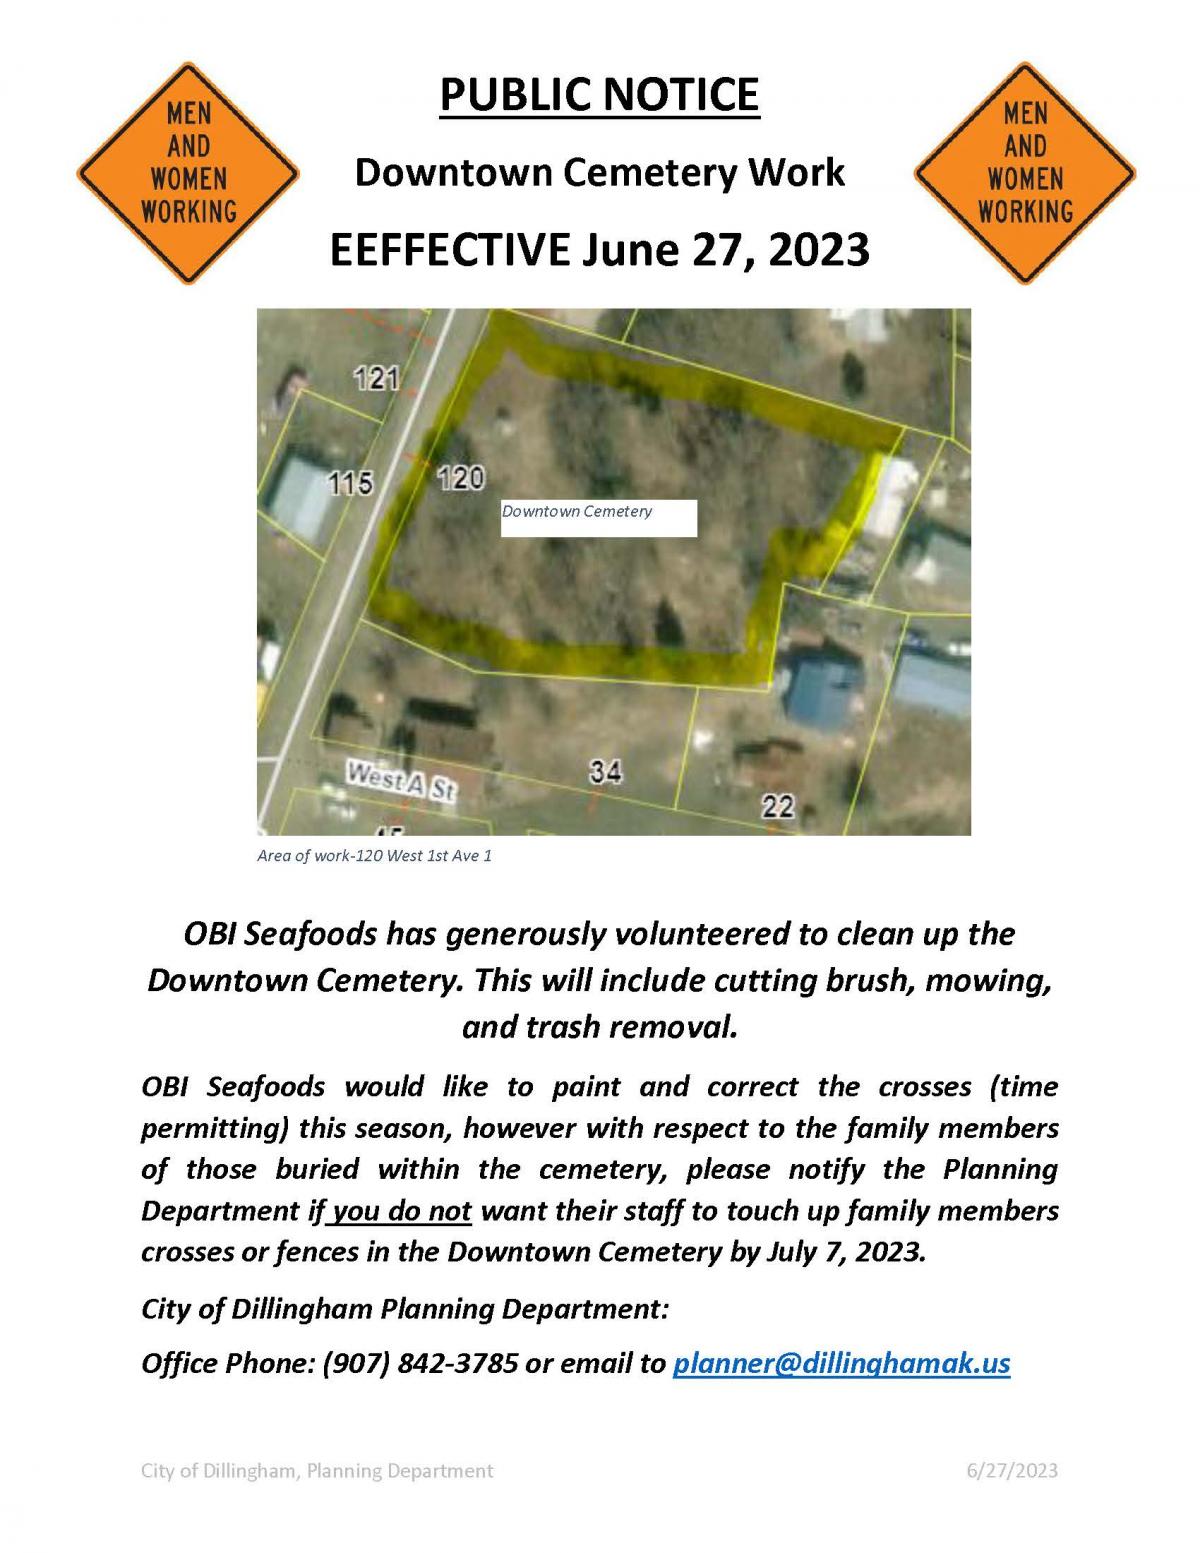 Downtown Cemetery Work starting 6/27/2023